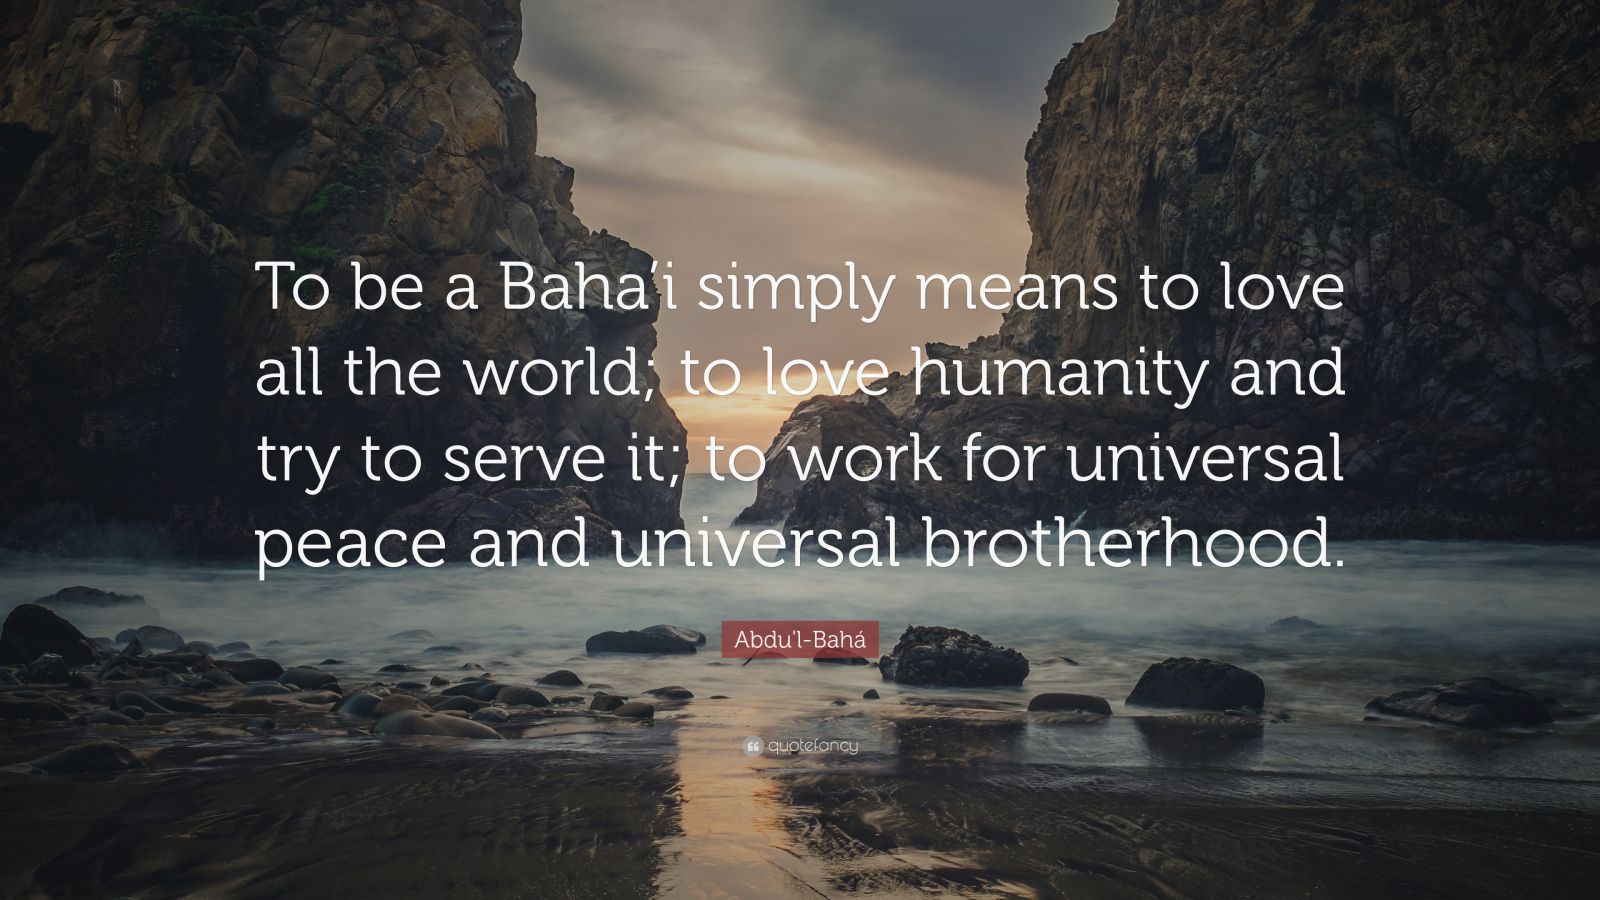 Abdu'lBahá Quote “To be a Baha’i simply means to love all the world